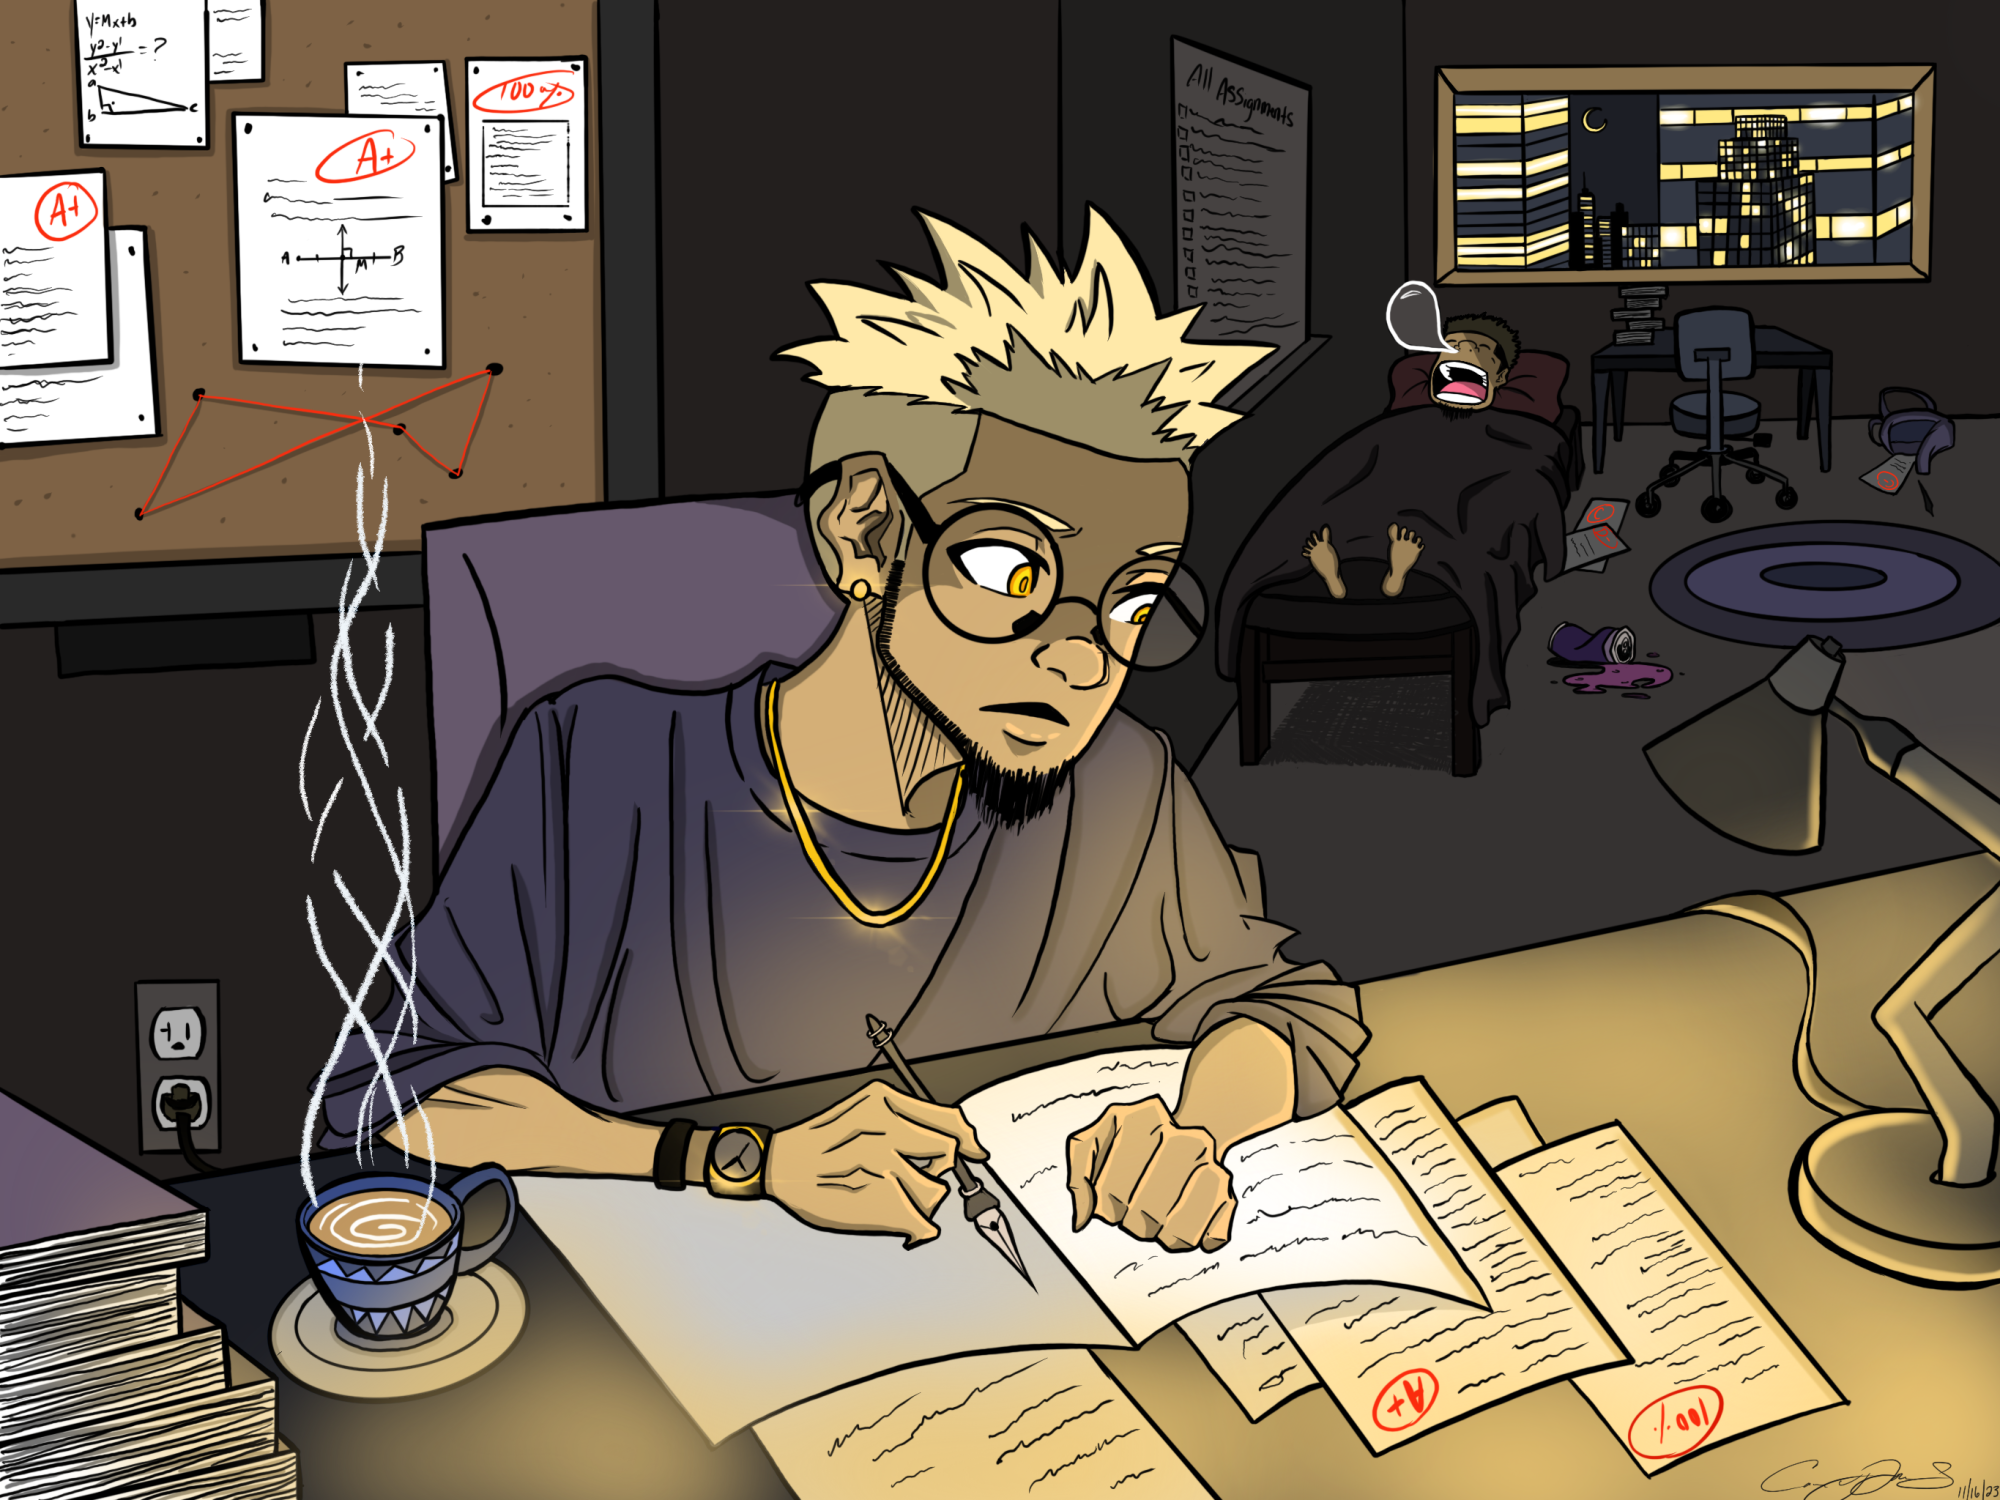 Drawing of a person sitting at a desk writing late at night